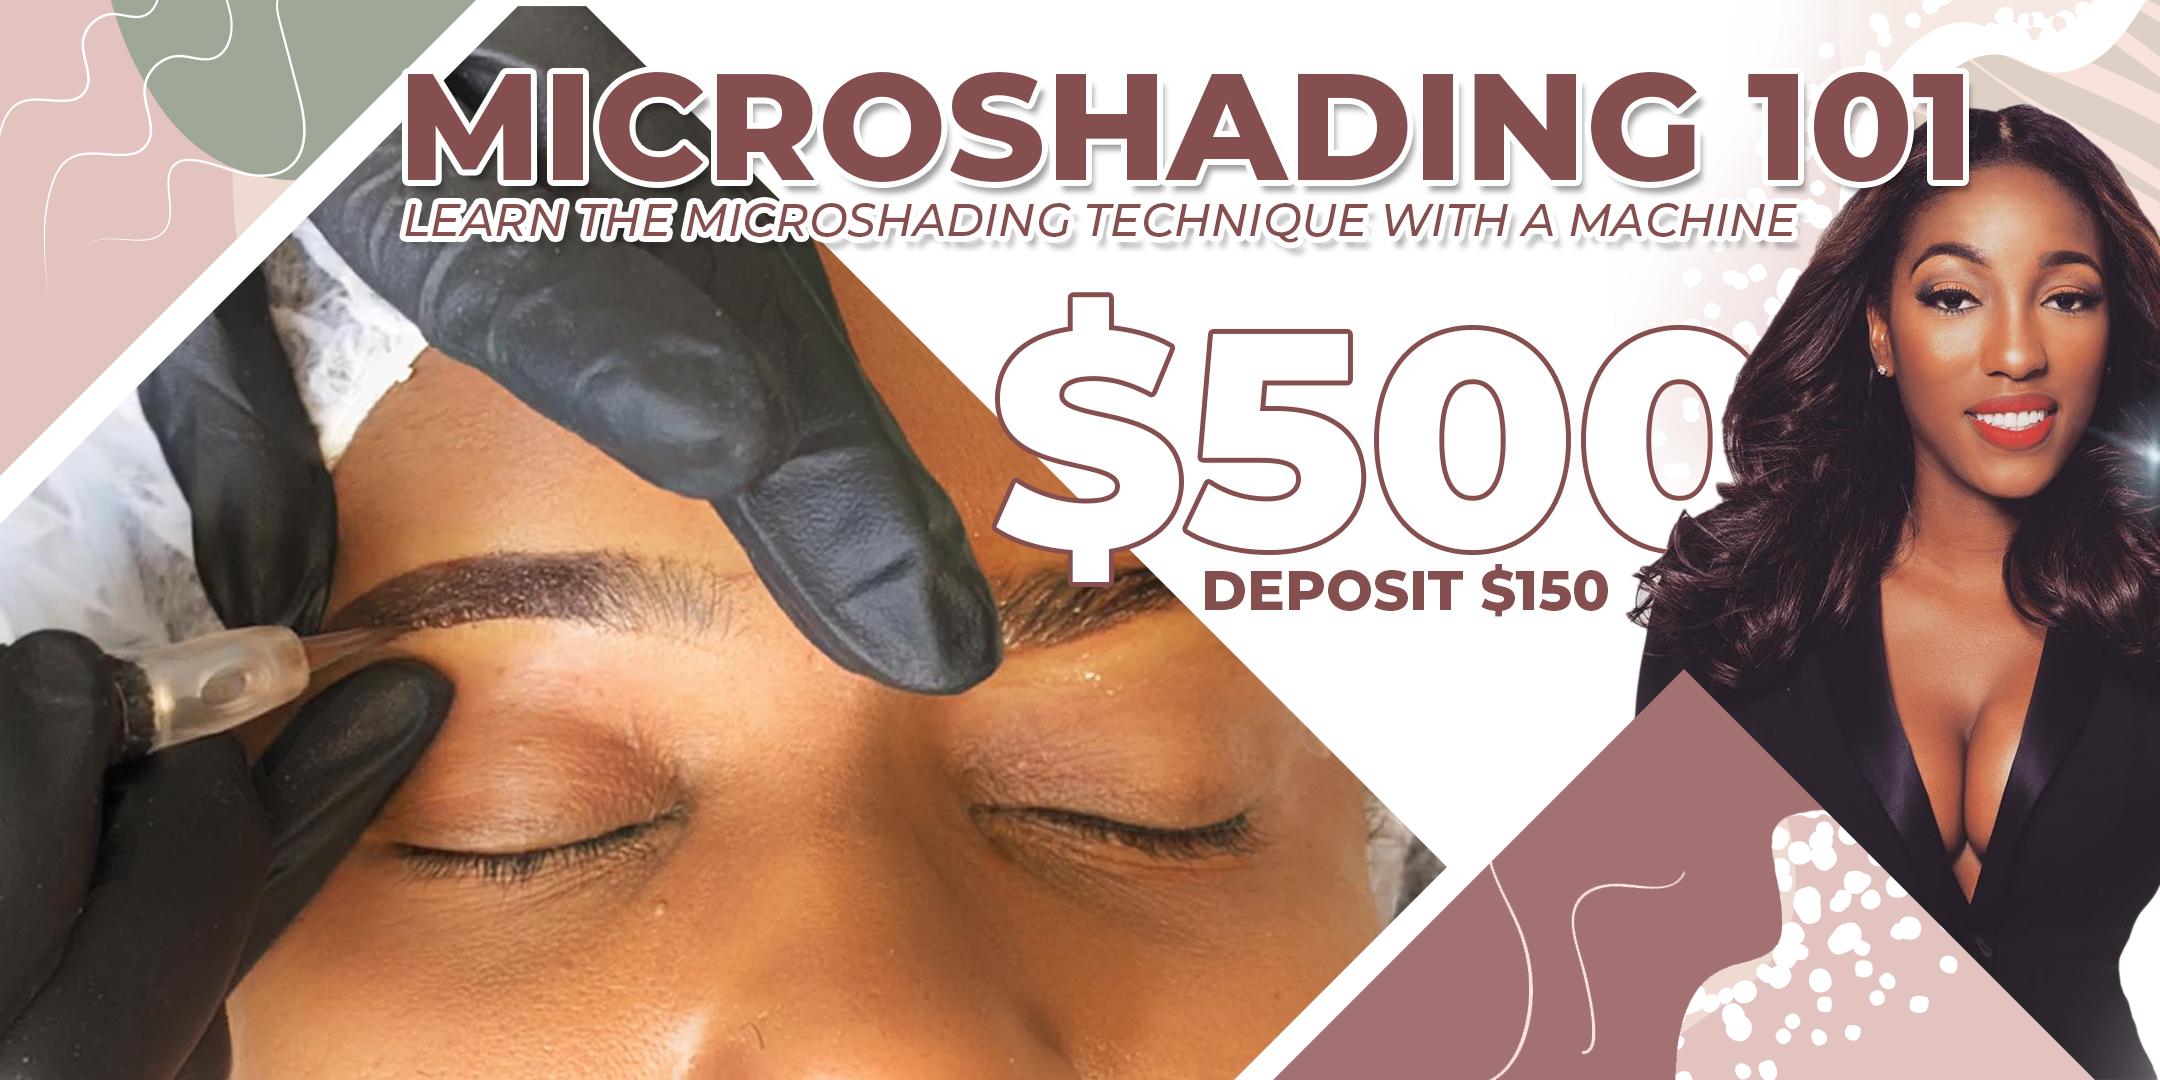 Dallas TX Microshading with Device 101 | September 20 | 11 AM - 5 PM